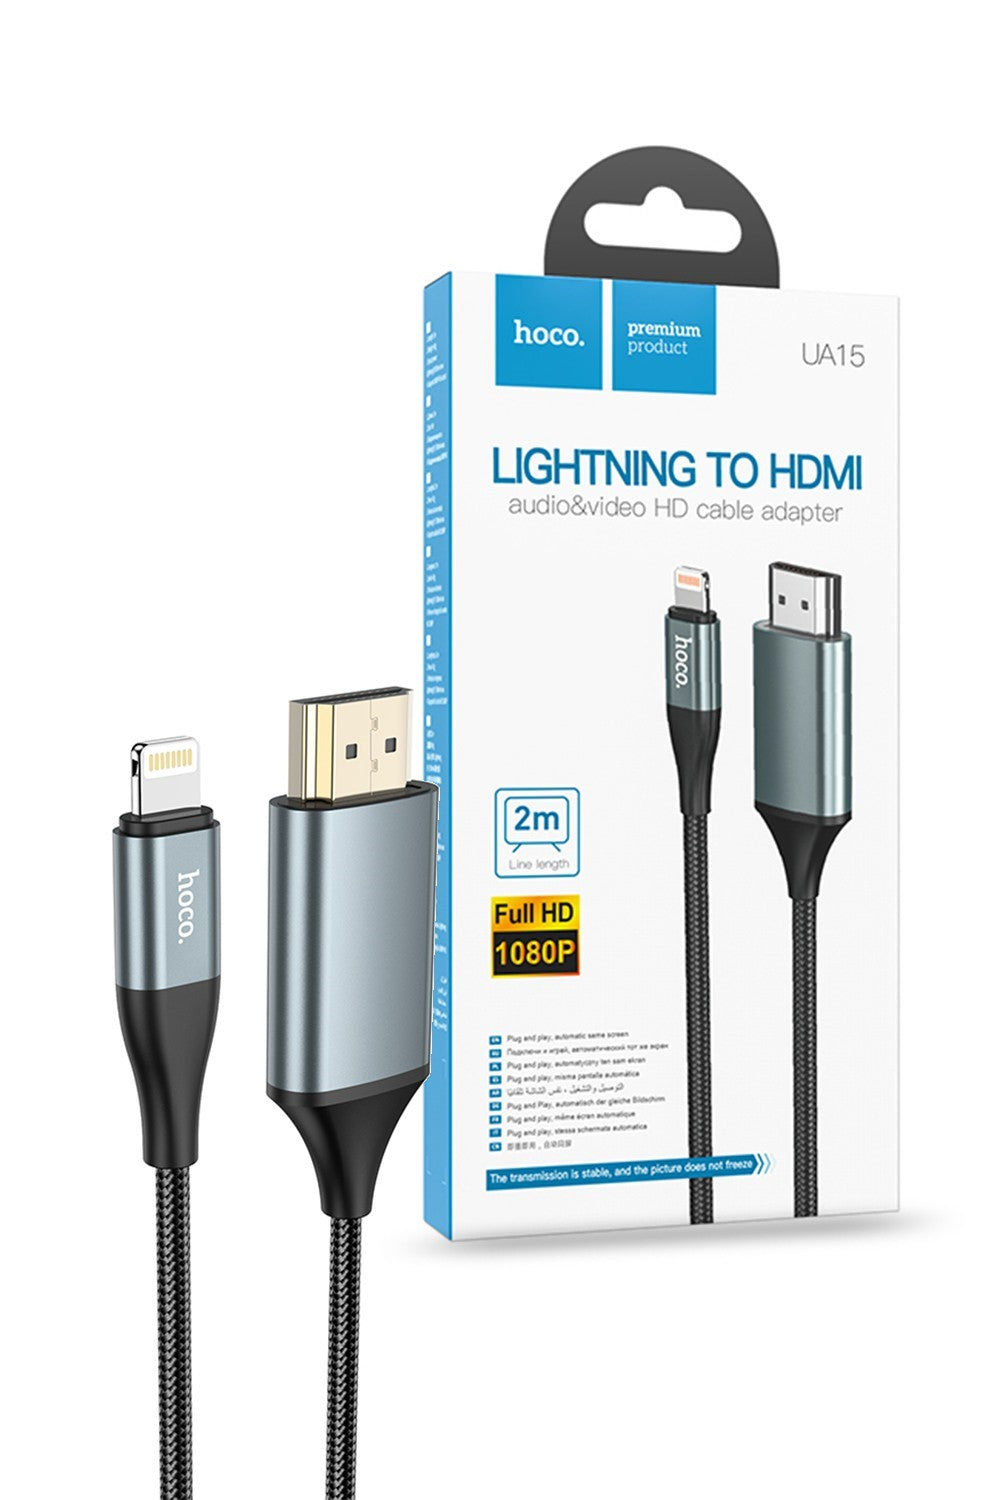 Hoco Lightning to HDMI Cable 2m for iPhone iPad UA15